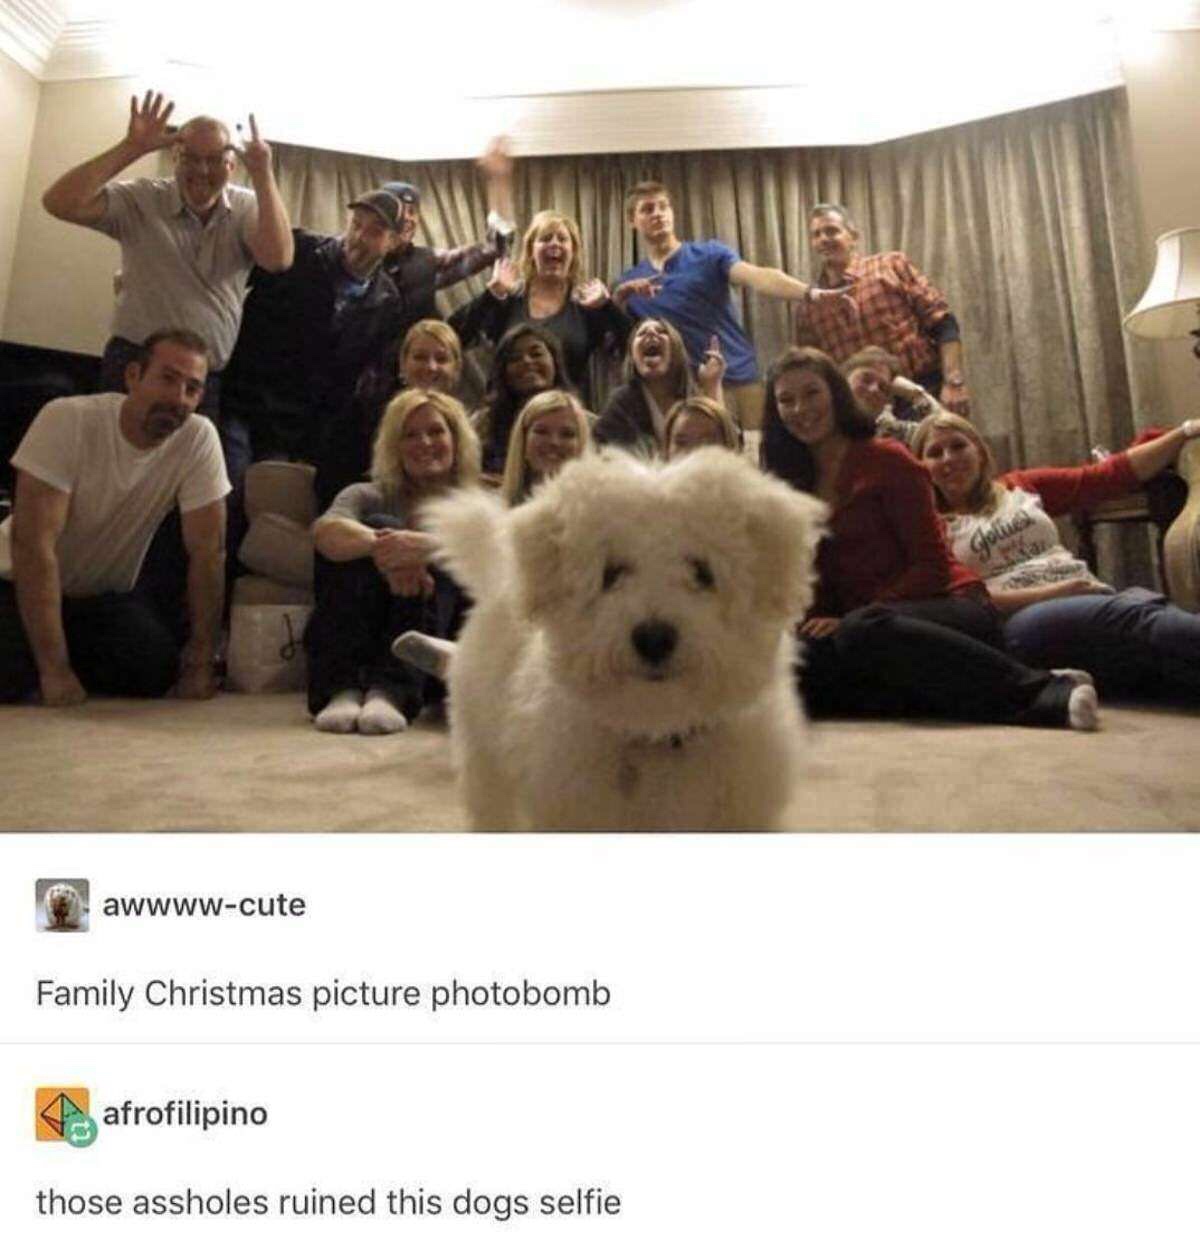 cutest photo bomb - awwwwcute Family Christmas picture photobomb A afrofilipino those assholes ruined this dogs selfie